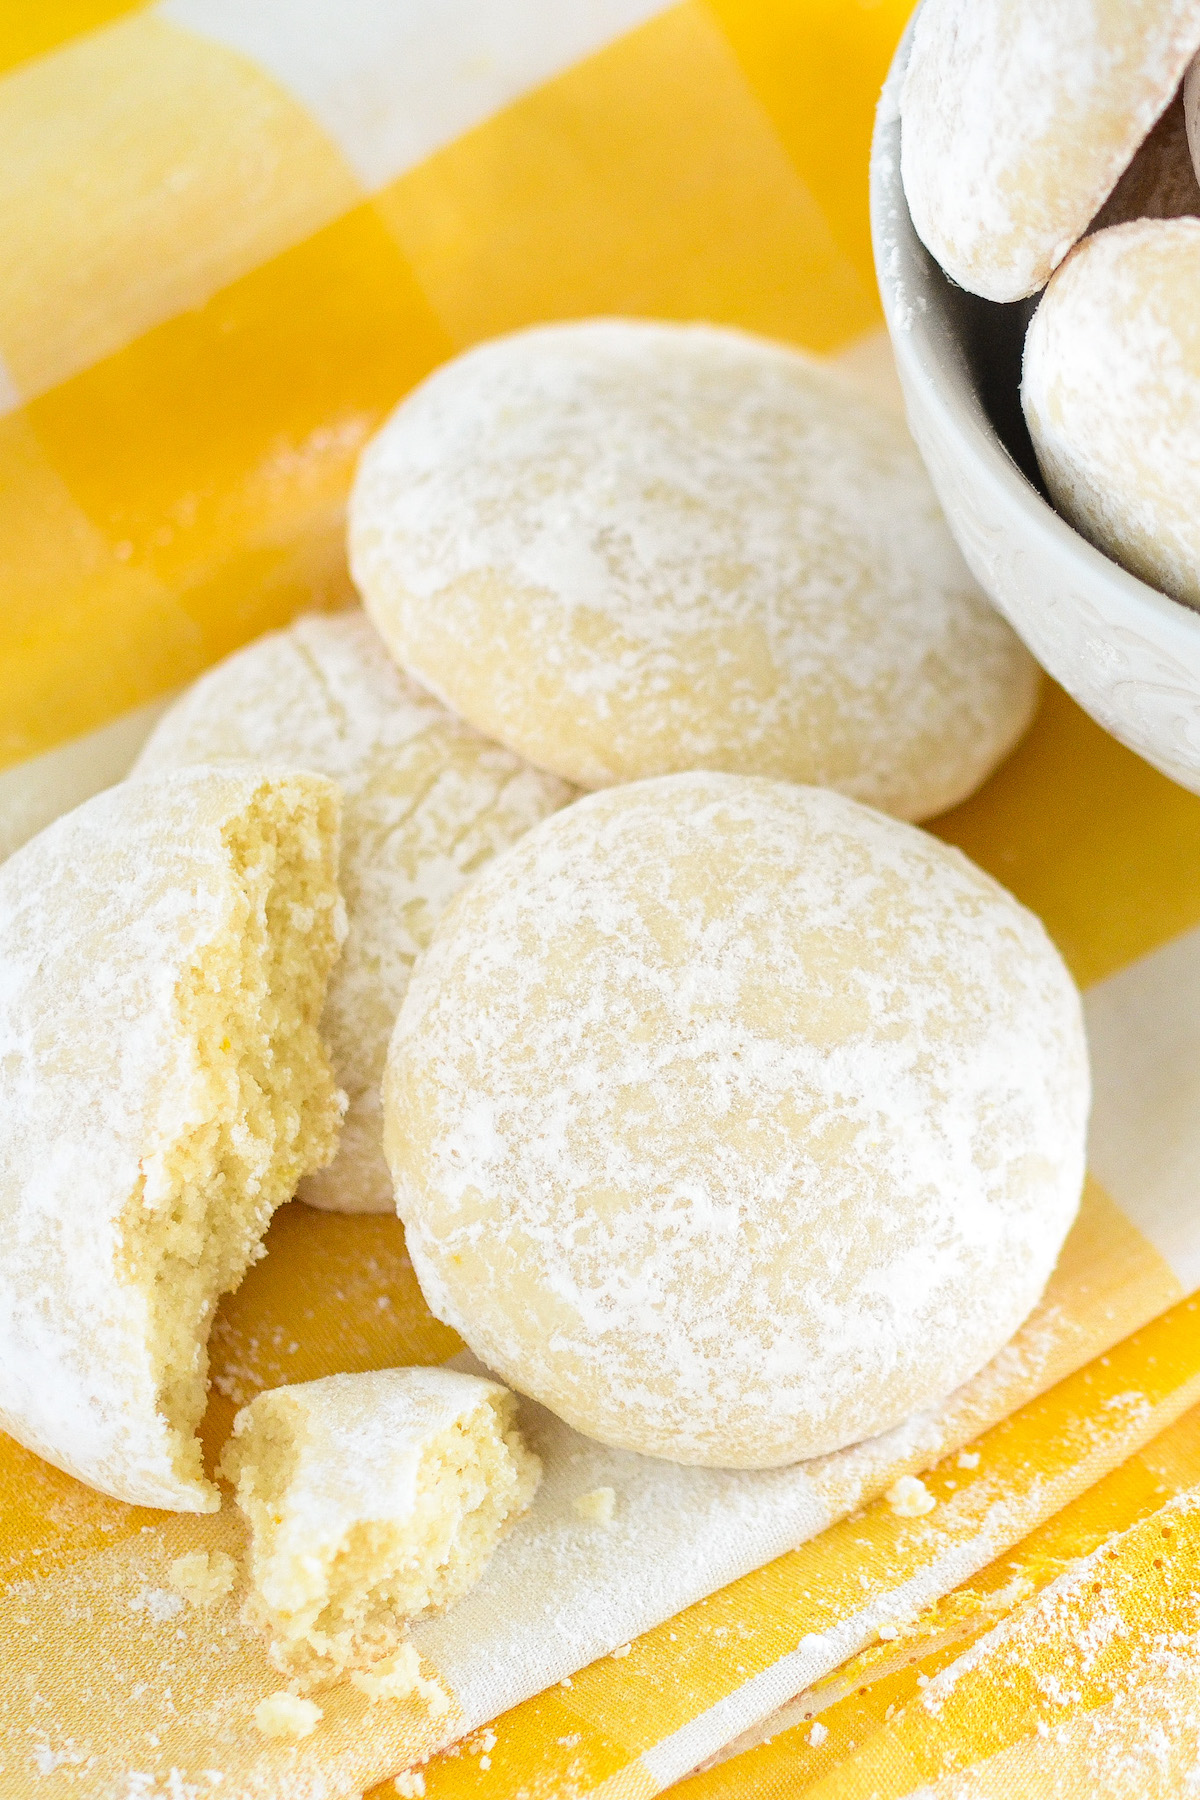 Lemon cooler cookies on a yellow napkin with a bowl of cookies in the background and one cookie with a bite taken out of it.